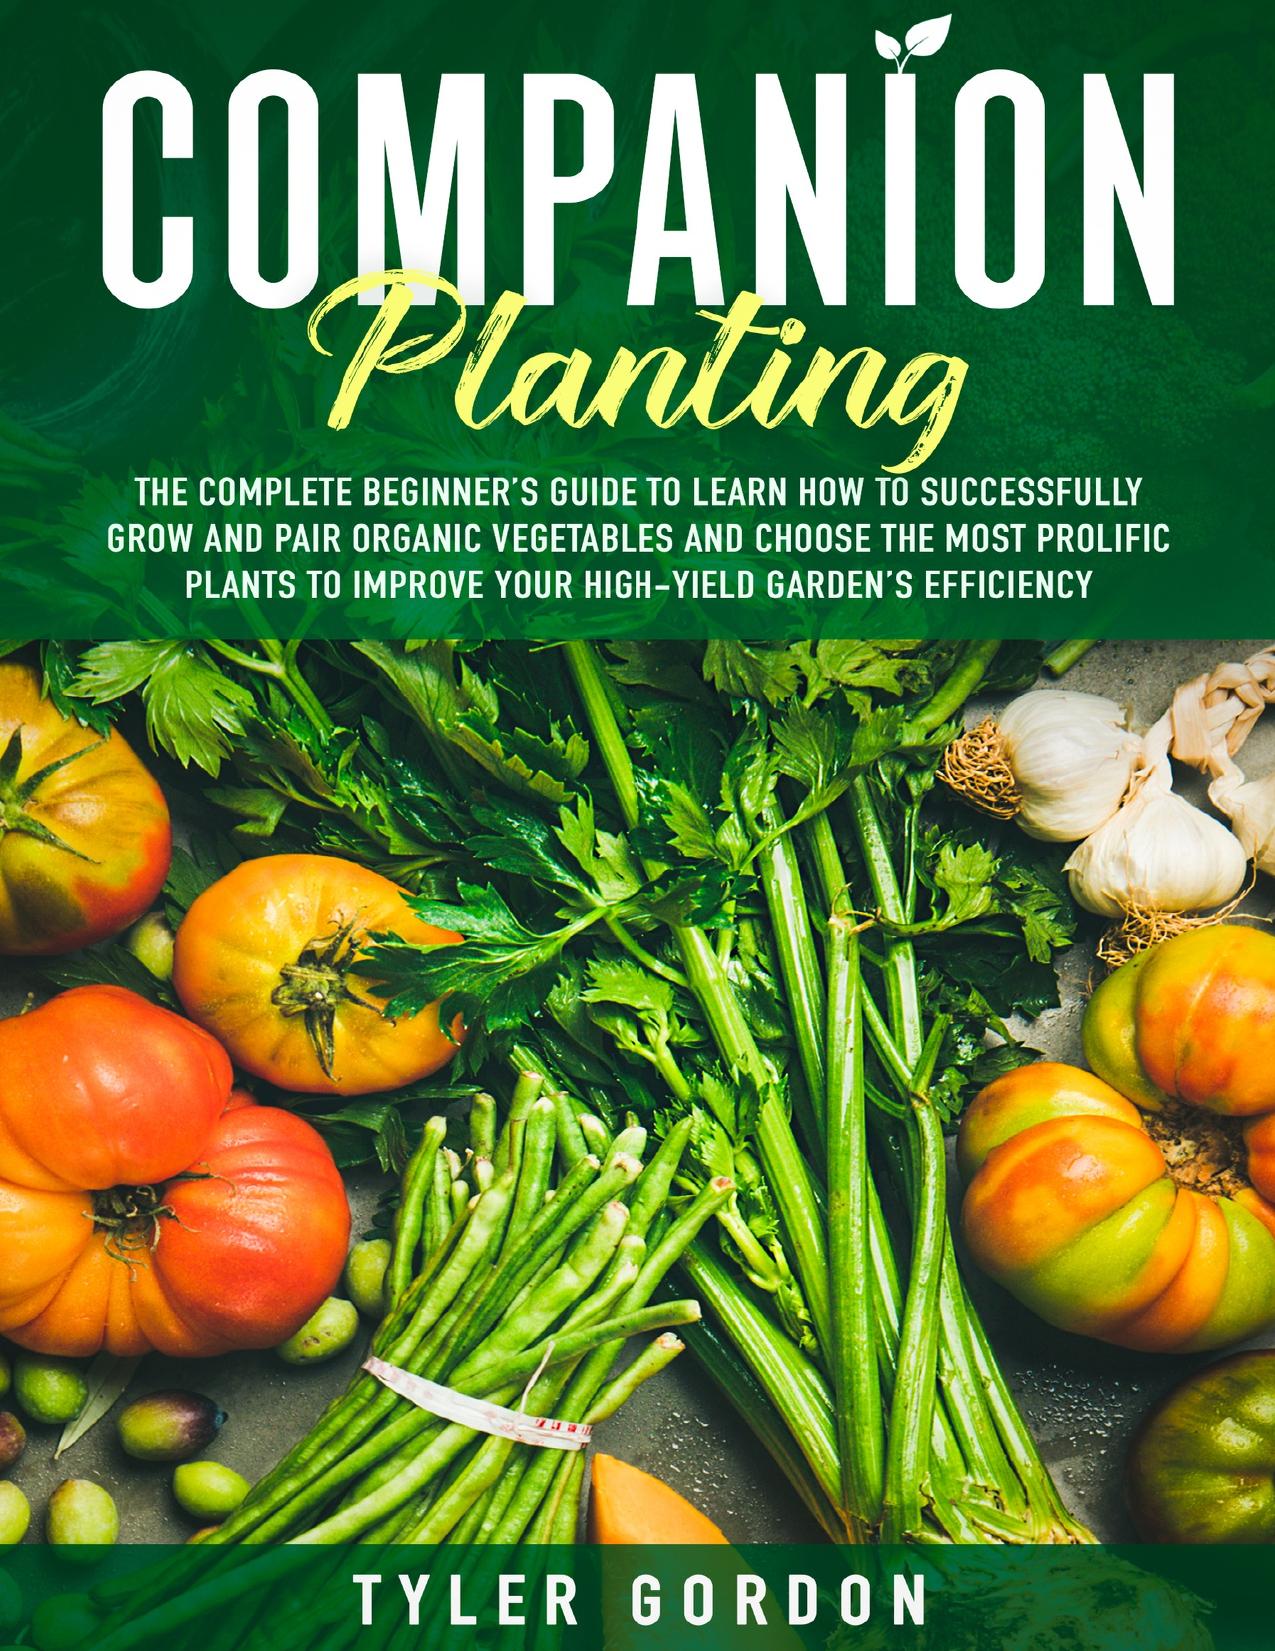 Companion Planting: The Complete Beginner’s Guide To Learn How to Successfully Grow and Pair Organic Vegetables and Choose the Most Prolific Plants to Improve Your High-Yield Garden’s Efficiency by Gordon Tyler